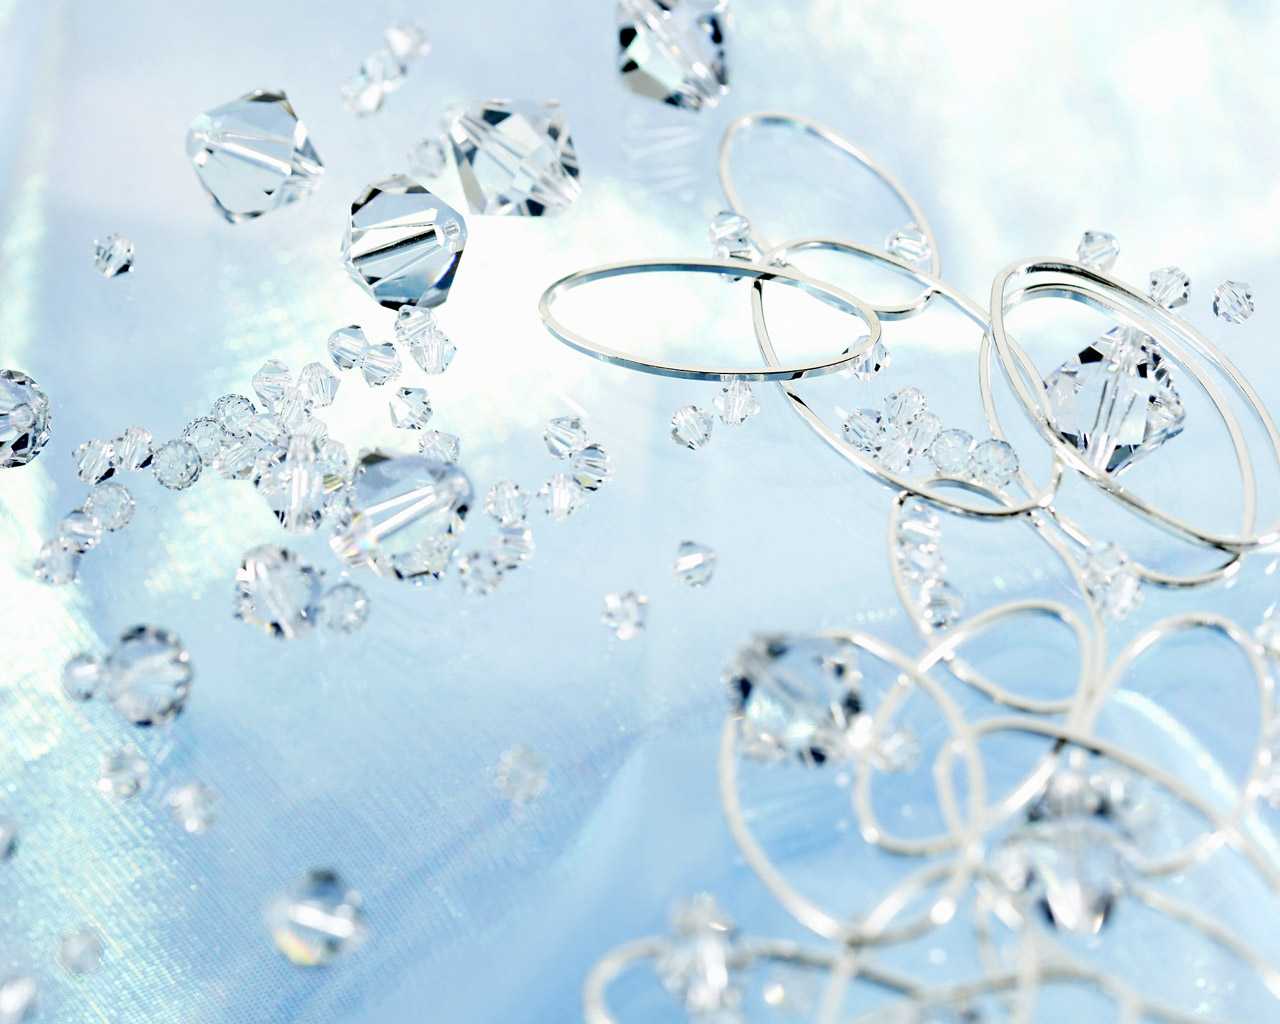 jewels  Other  Abstract Background Wallpapers on Desktop Nexus Image  262521